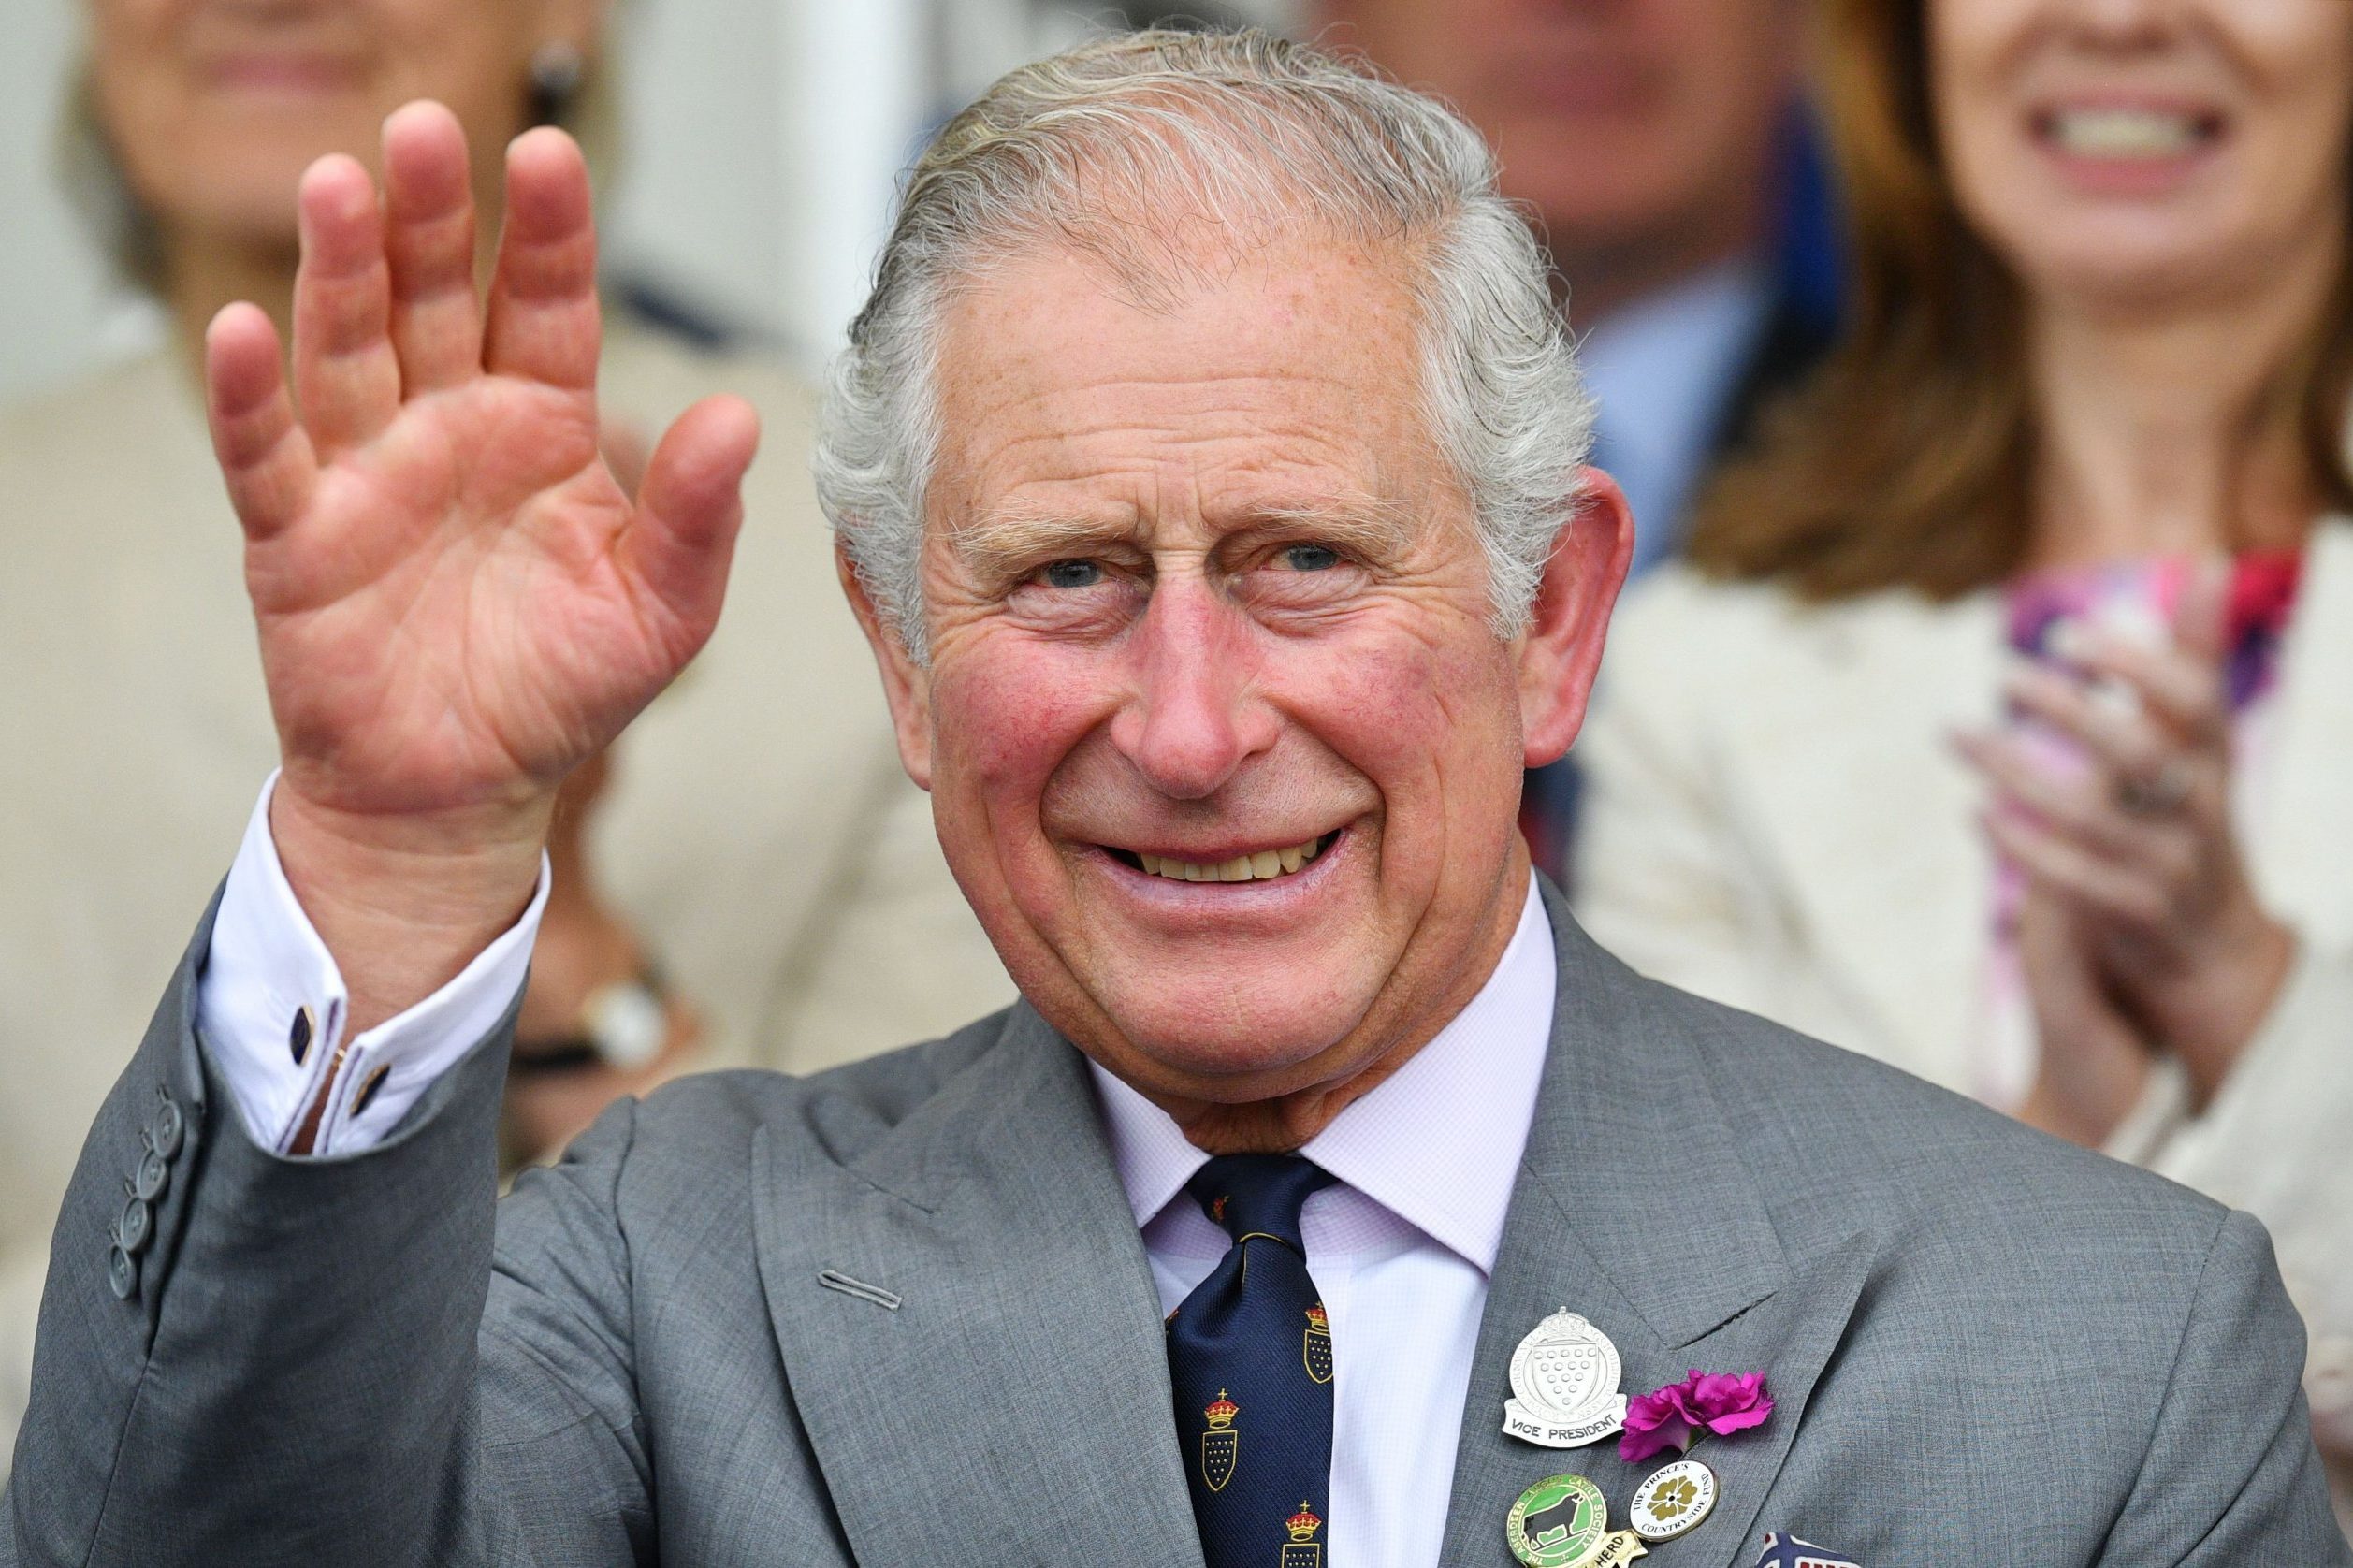 15 Commonwealth Realms - Countries King Charles III Reigns Over Now